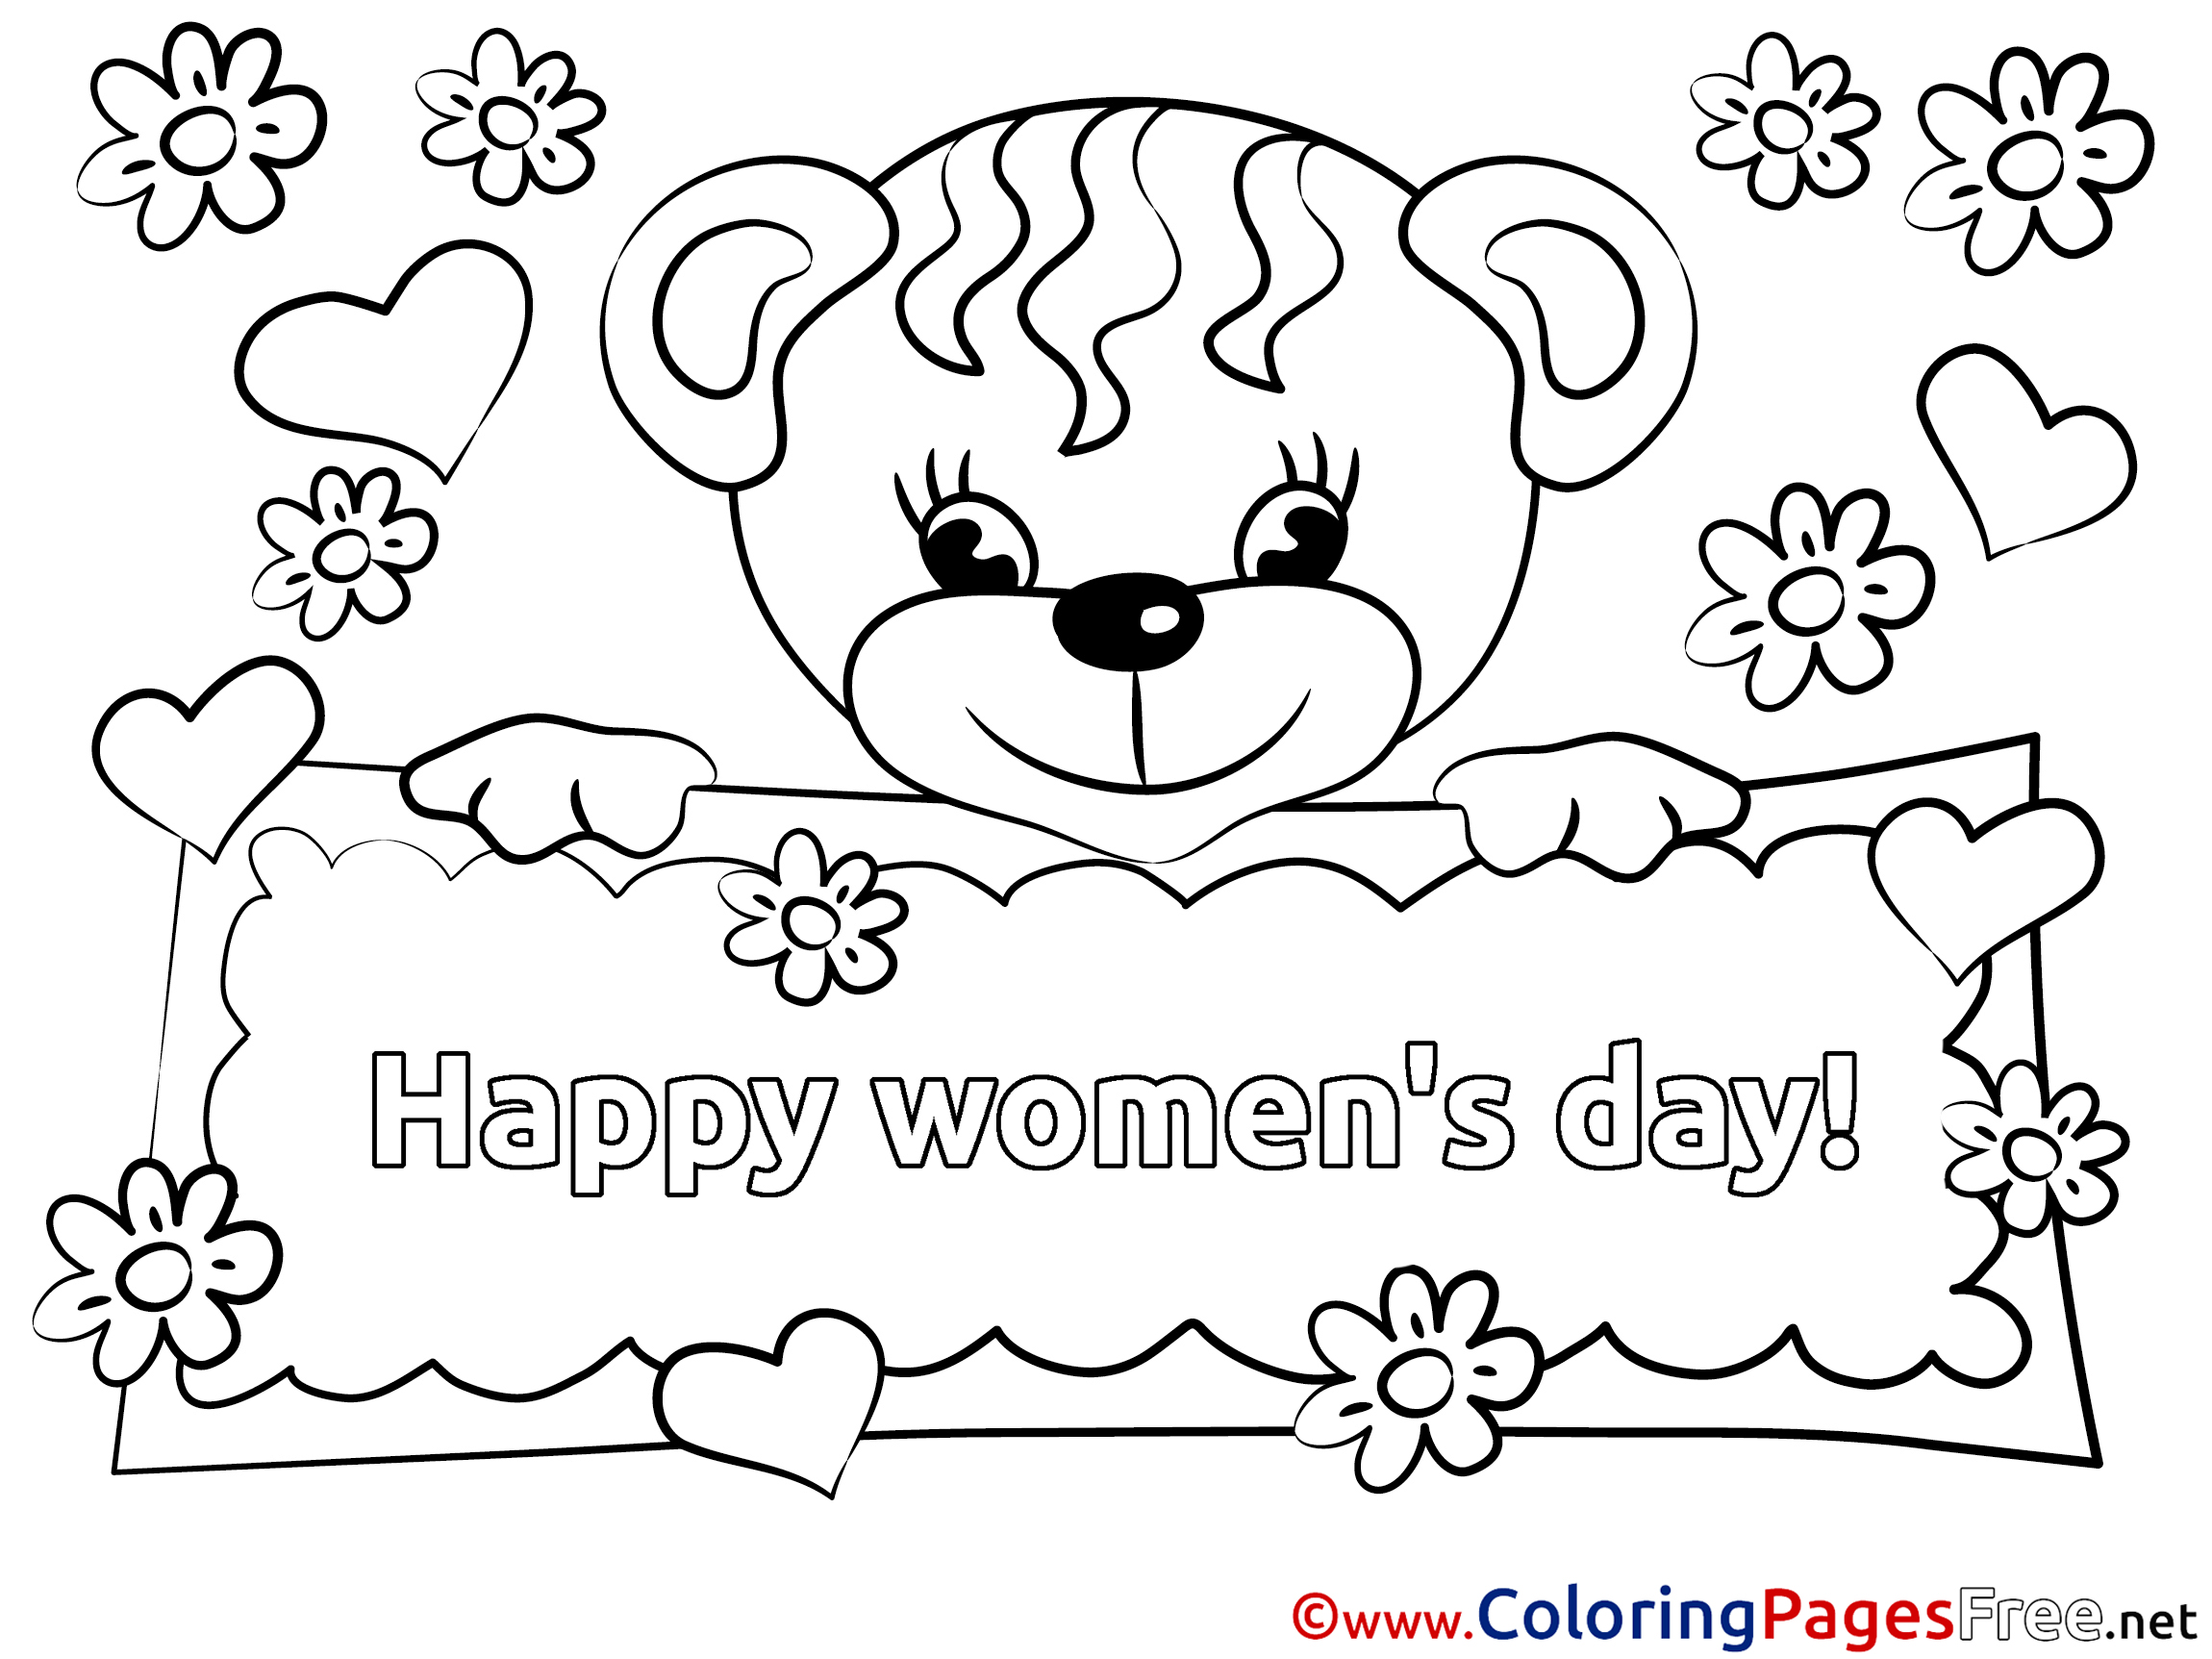 Download Tiger Women's Day Coloring Pages download